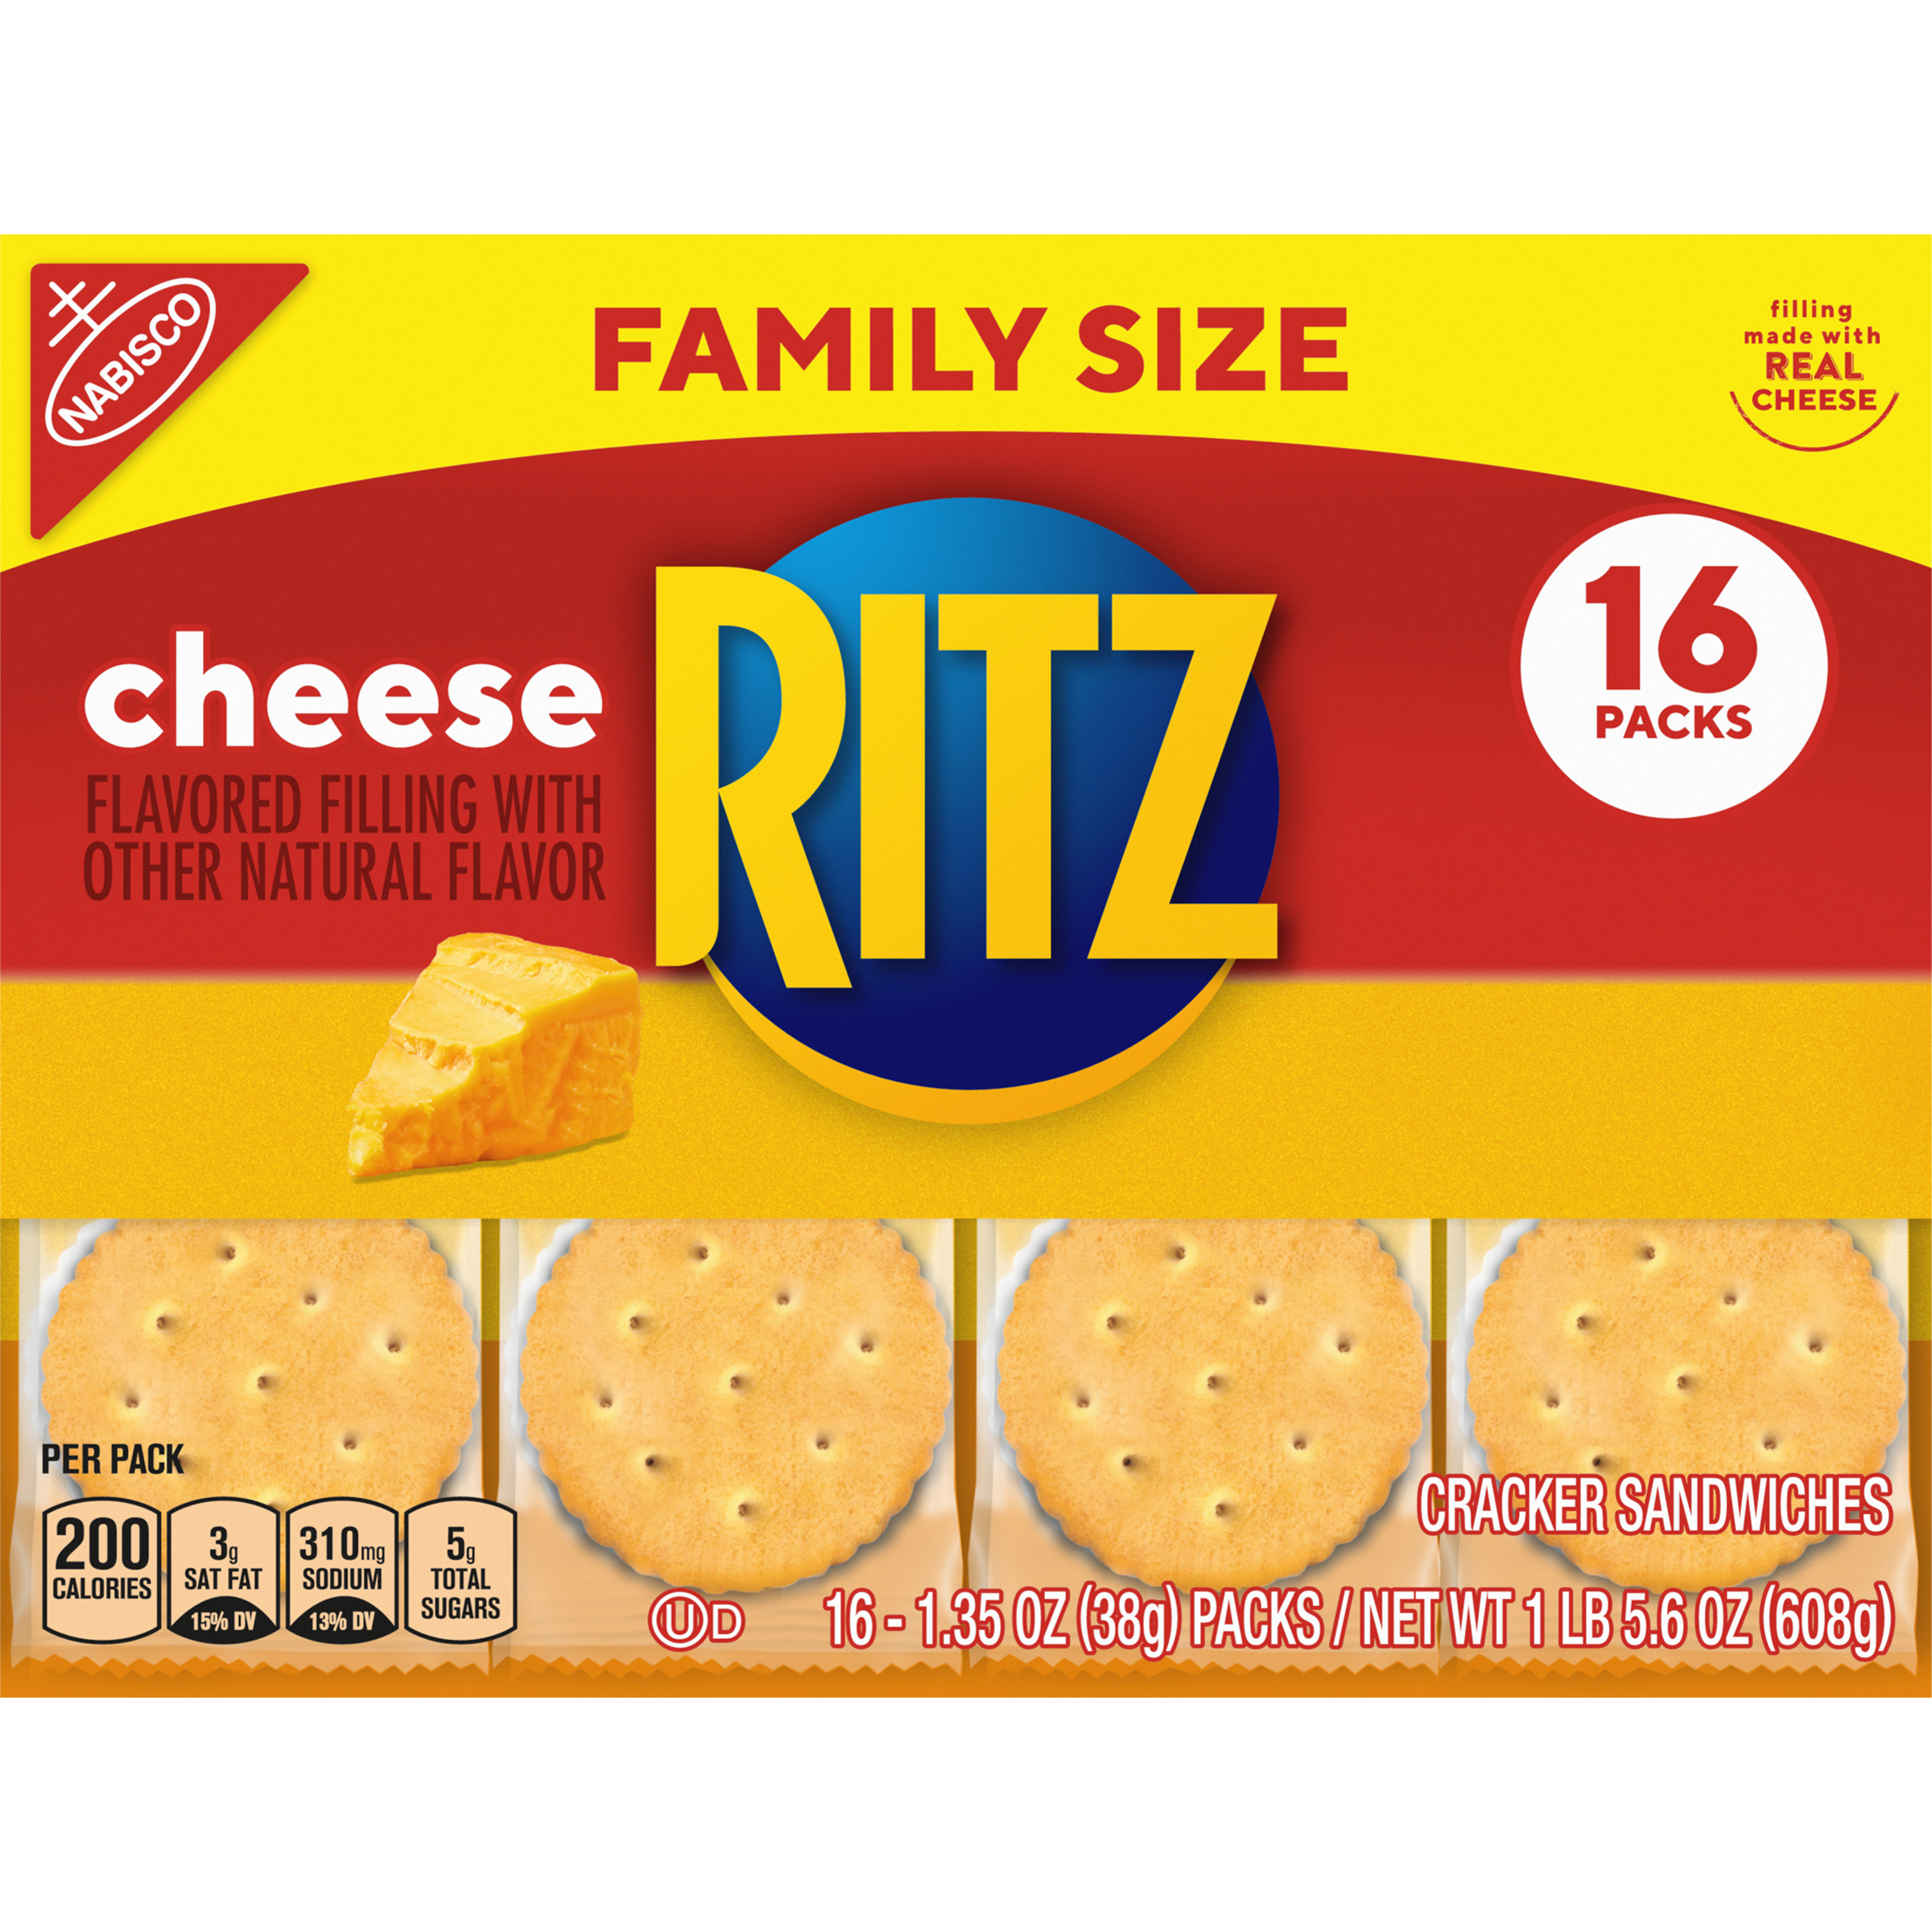 RITZ Cheese Sandwich Crackers, Family Size, 16 - 1.35 oz Packs-1